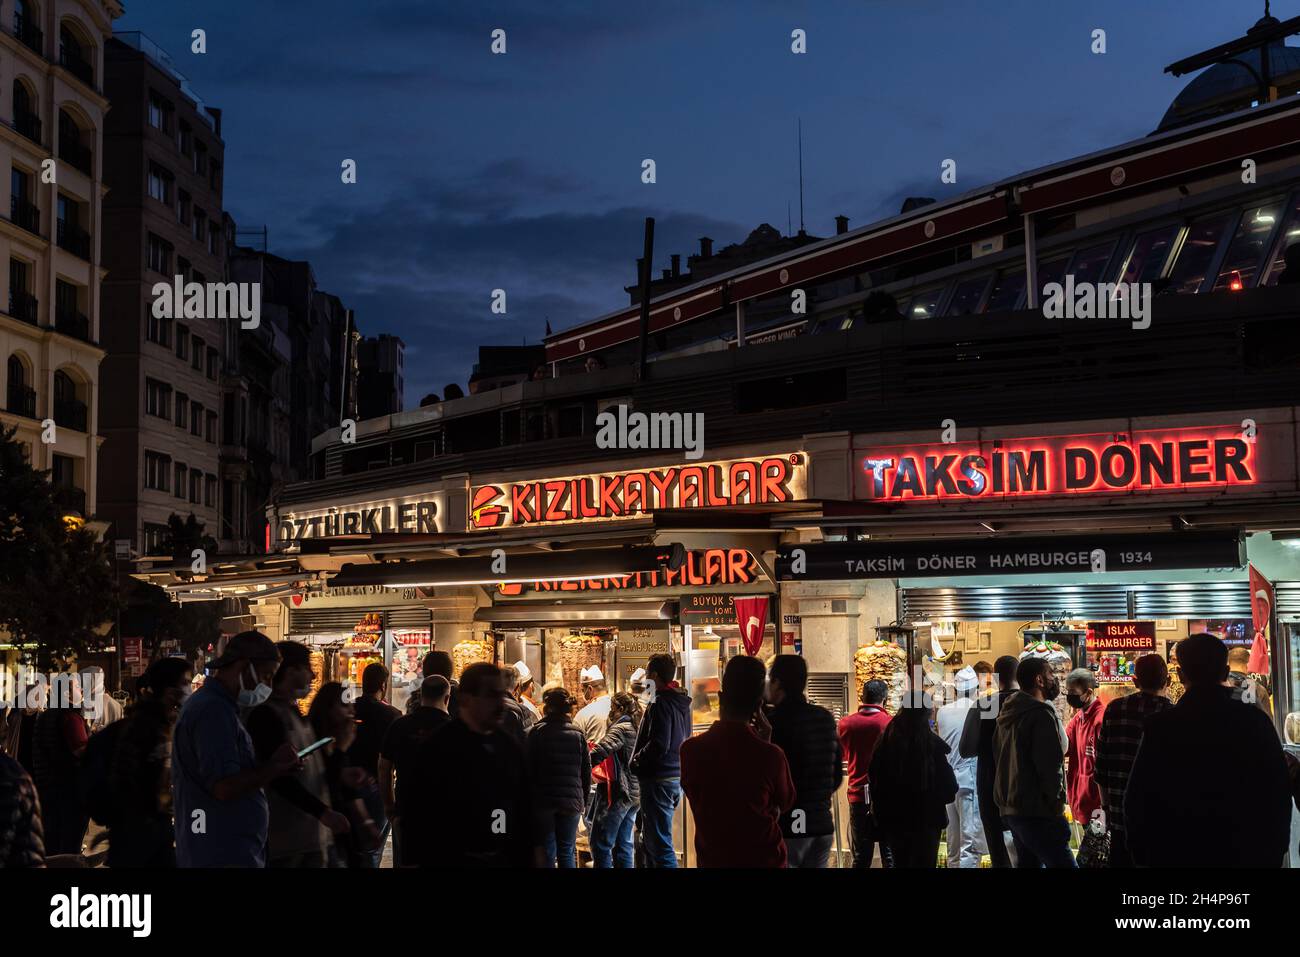 Istanbul Turkey. October 18th 2021  One of the most popular places to eat Doner Kebab at night in Istanbul, Taksim Square take-away kebab Restaurants Stock Photo